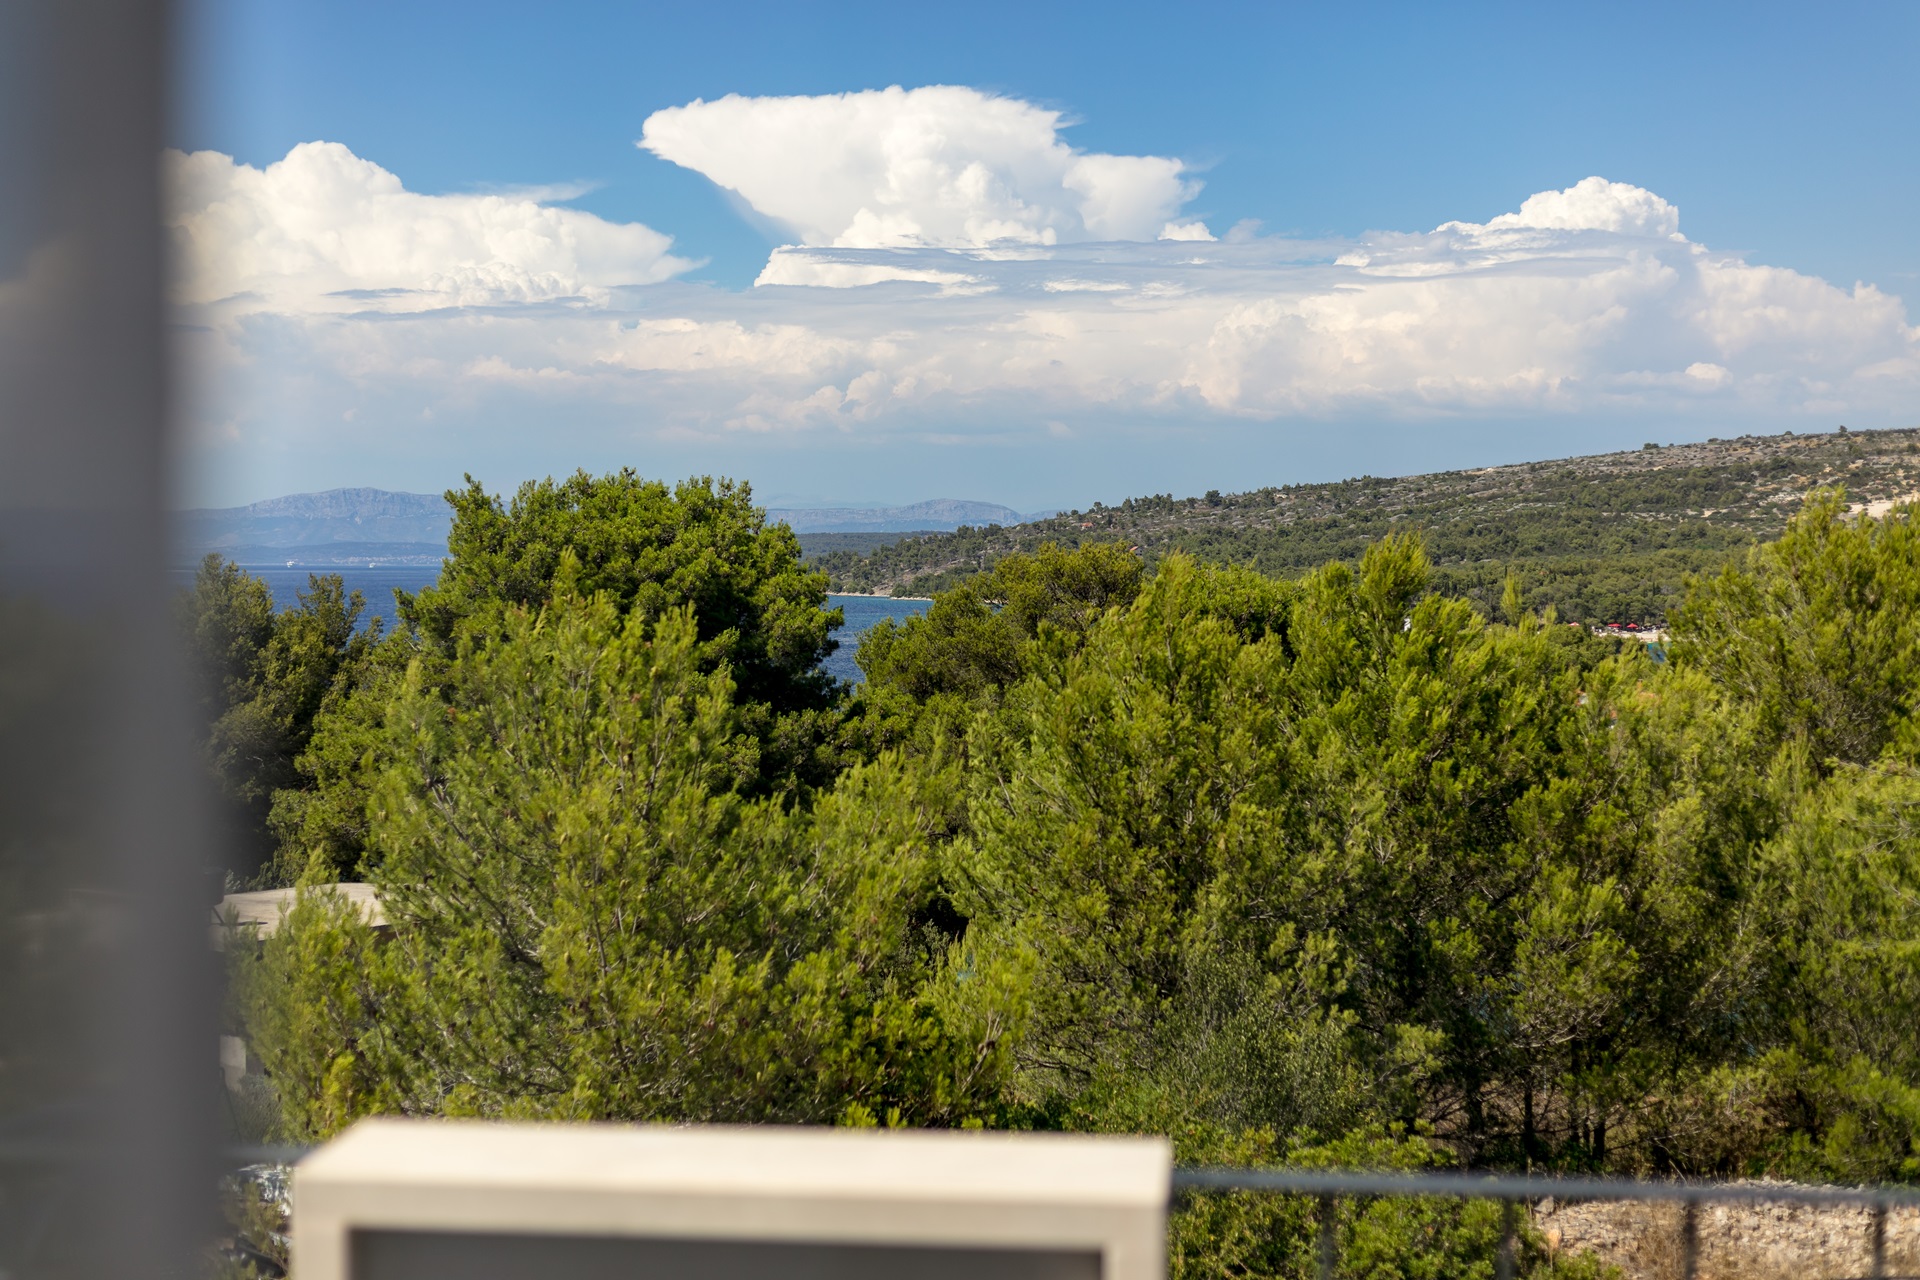 The view from the villa on Brač